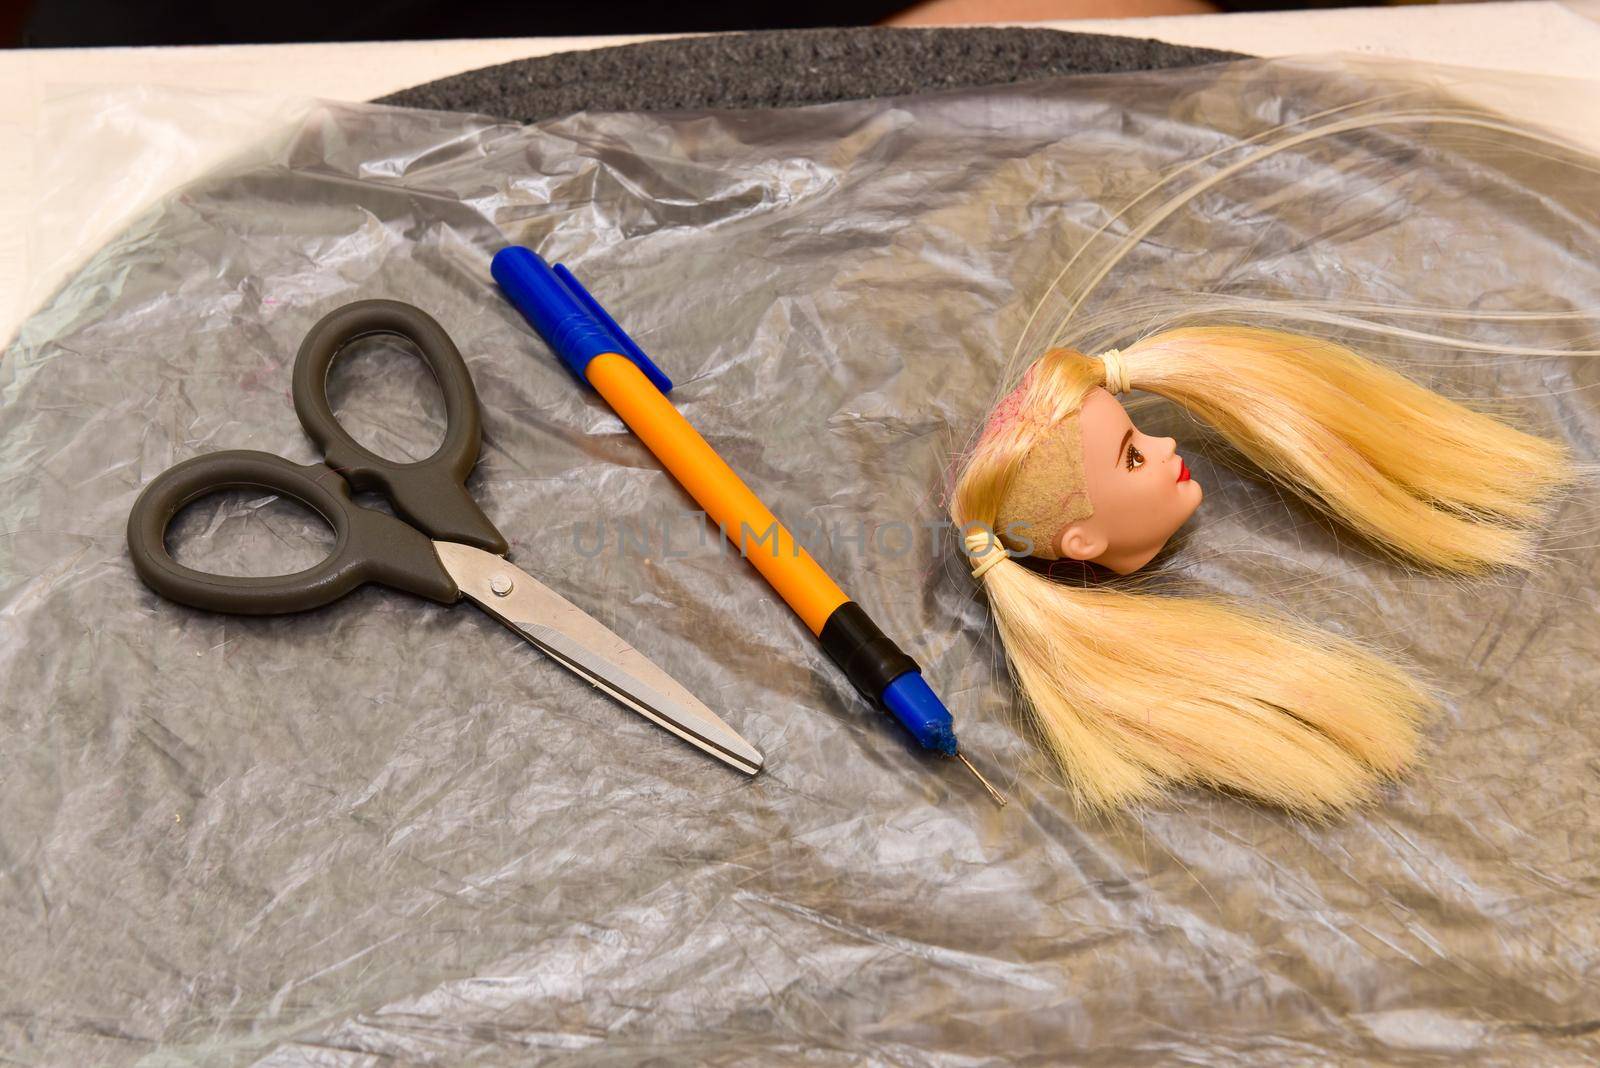 scissors and homemade tool on the table, how to make hair for a doll, hobby concept.